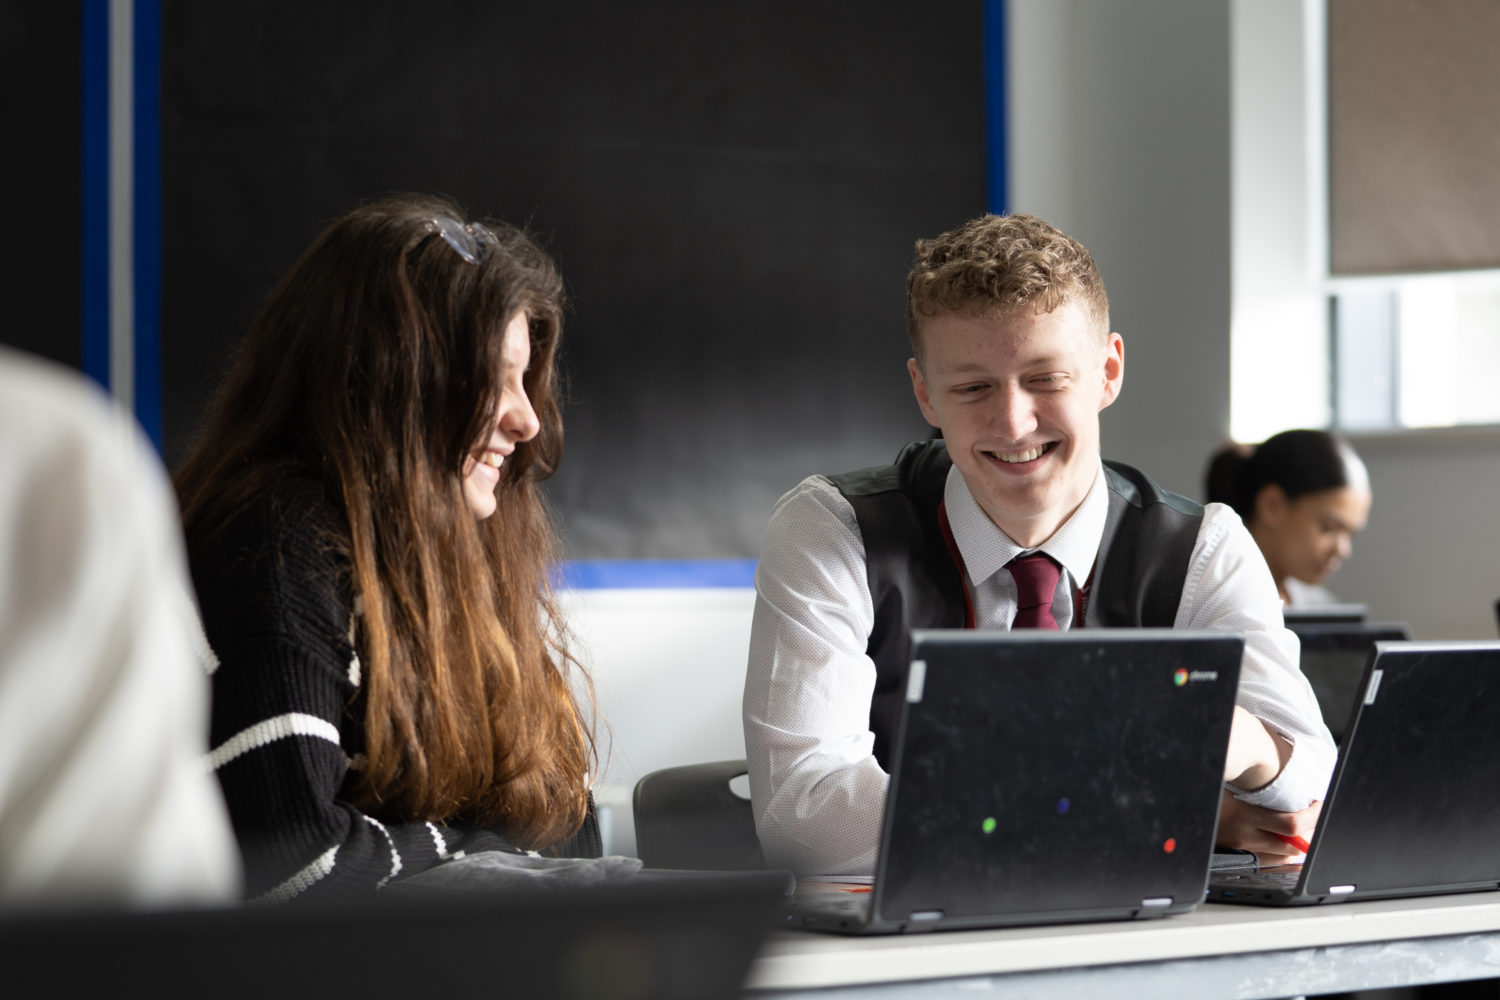 Two students smiling at a Chromebook